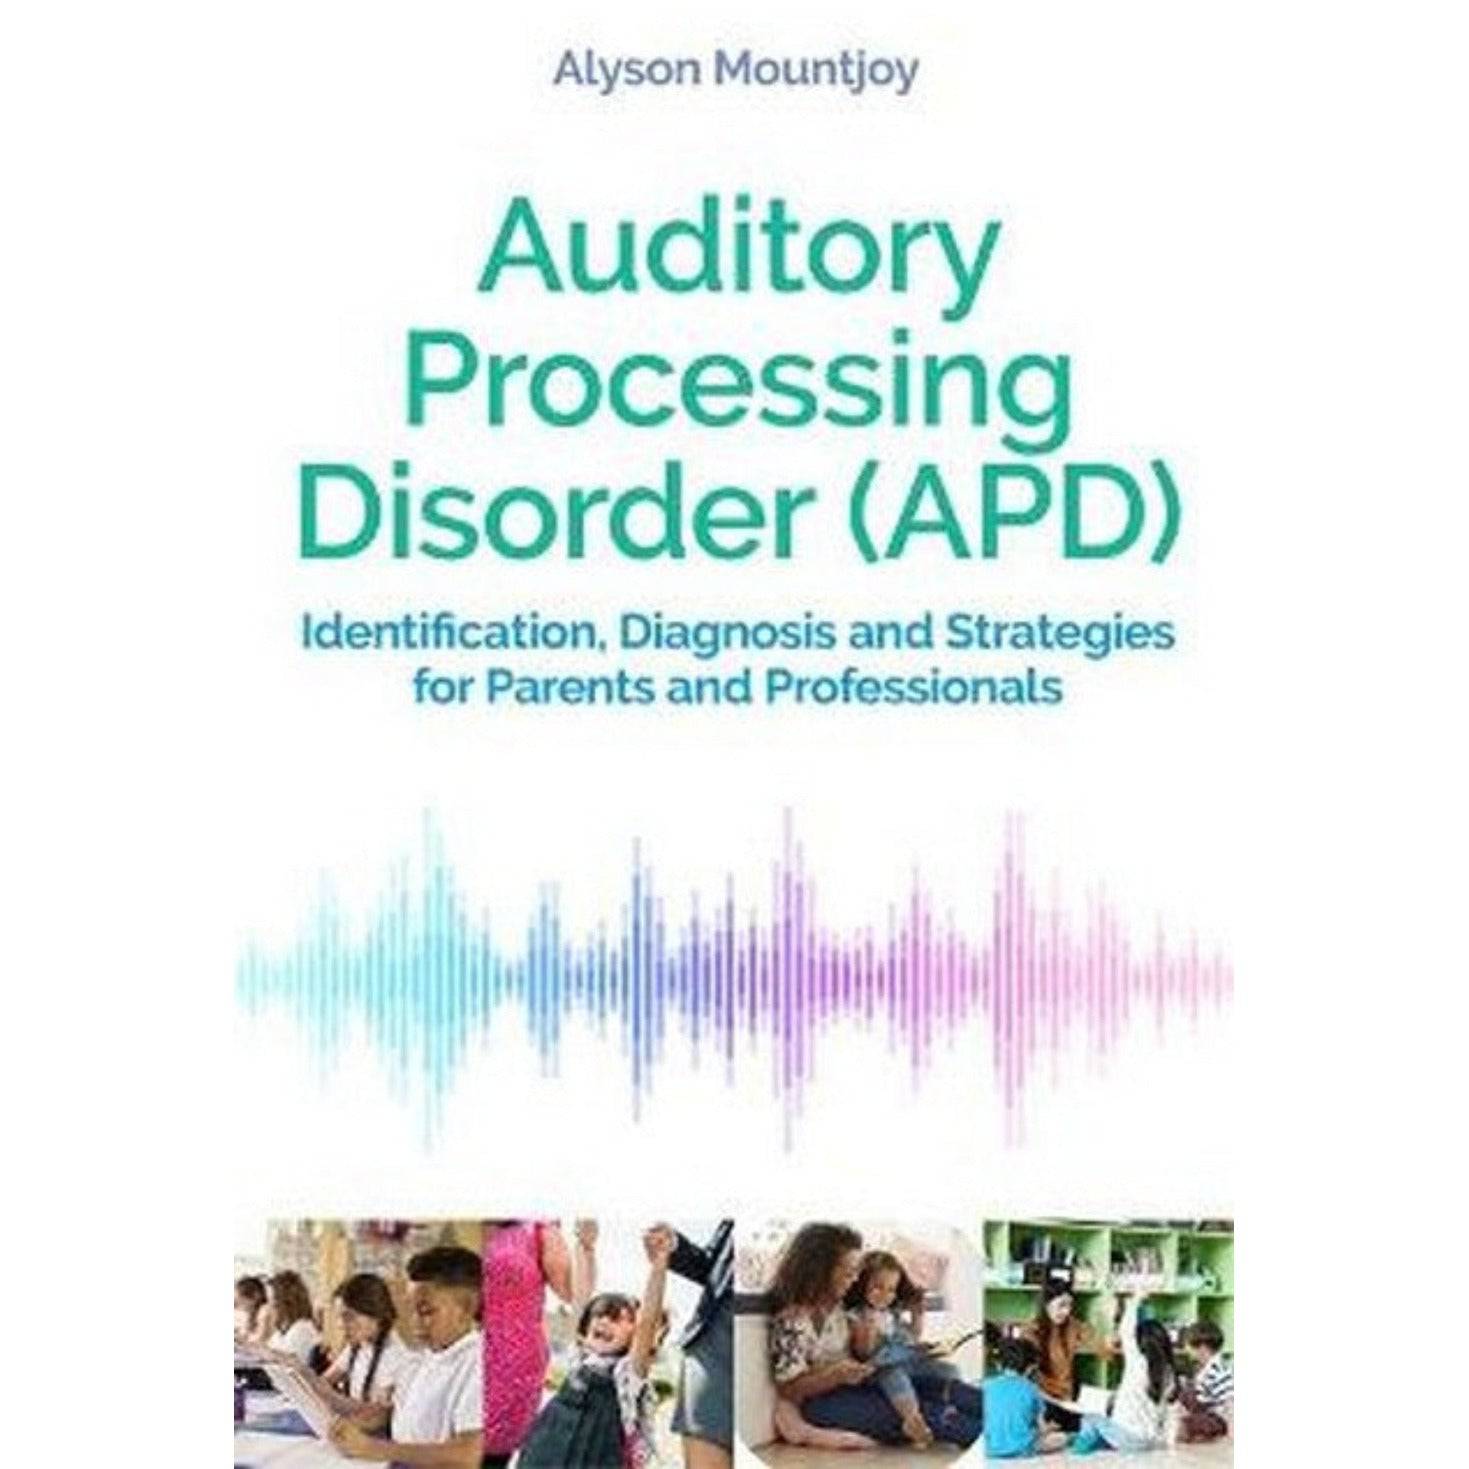 Auditory Processing Disorder (APD) Identification, Diagnosis and Strategies for Parents and Professionals - Sensory Circle